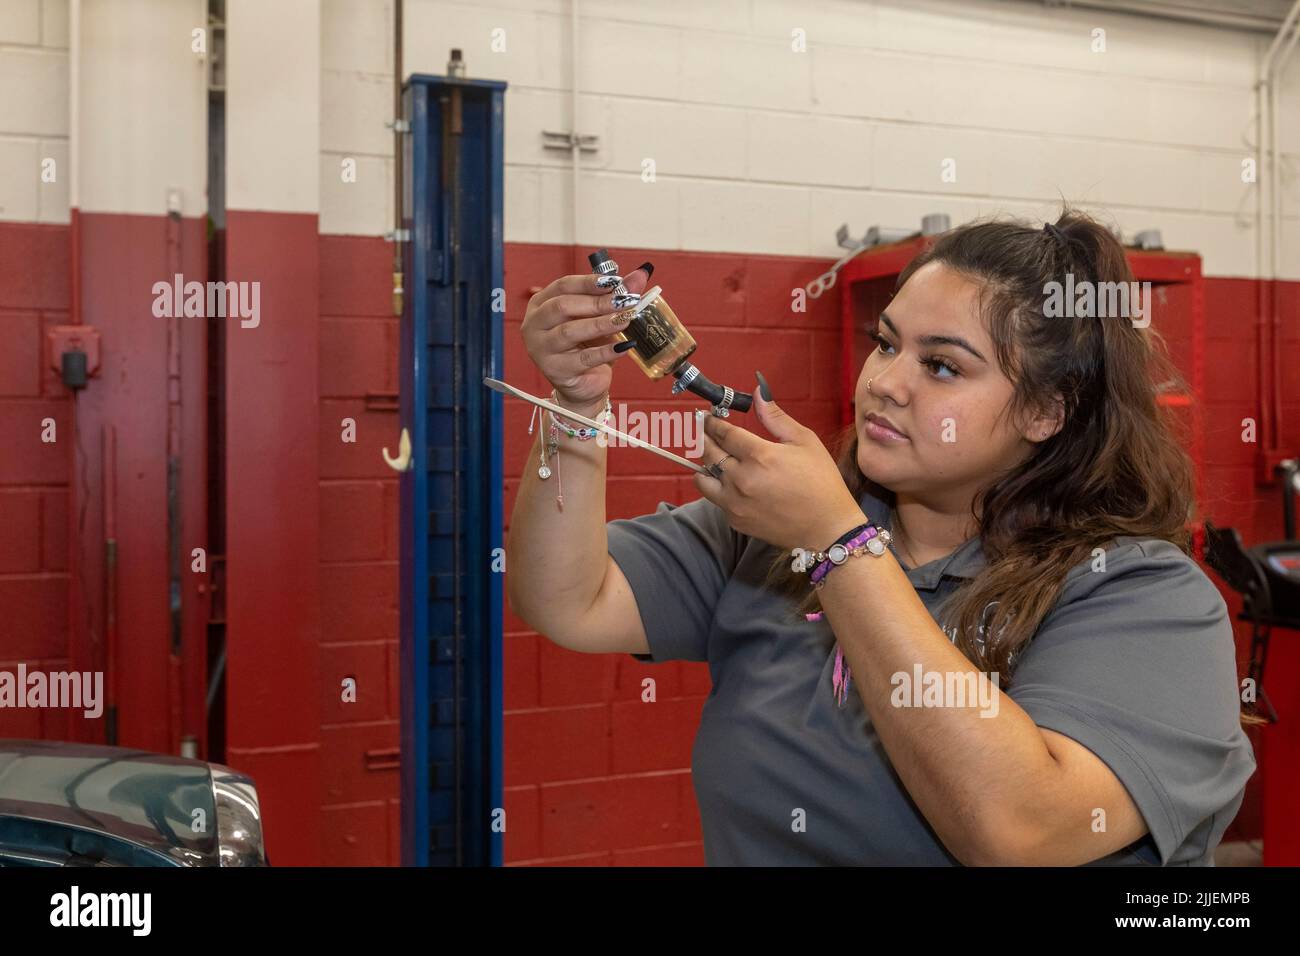 Aurora, Colorado - Cinthia Cabral examines a fuel filter she removed from a car at Hands of the Carpenter. The nonprofit repairs vehicles belonging to Stock Photo